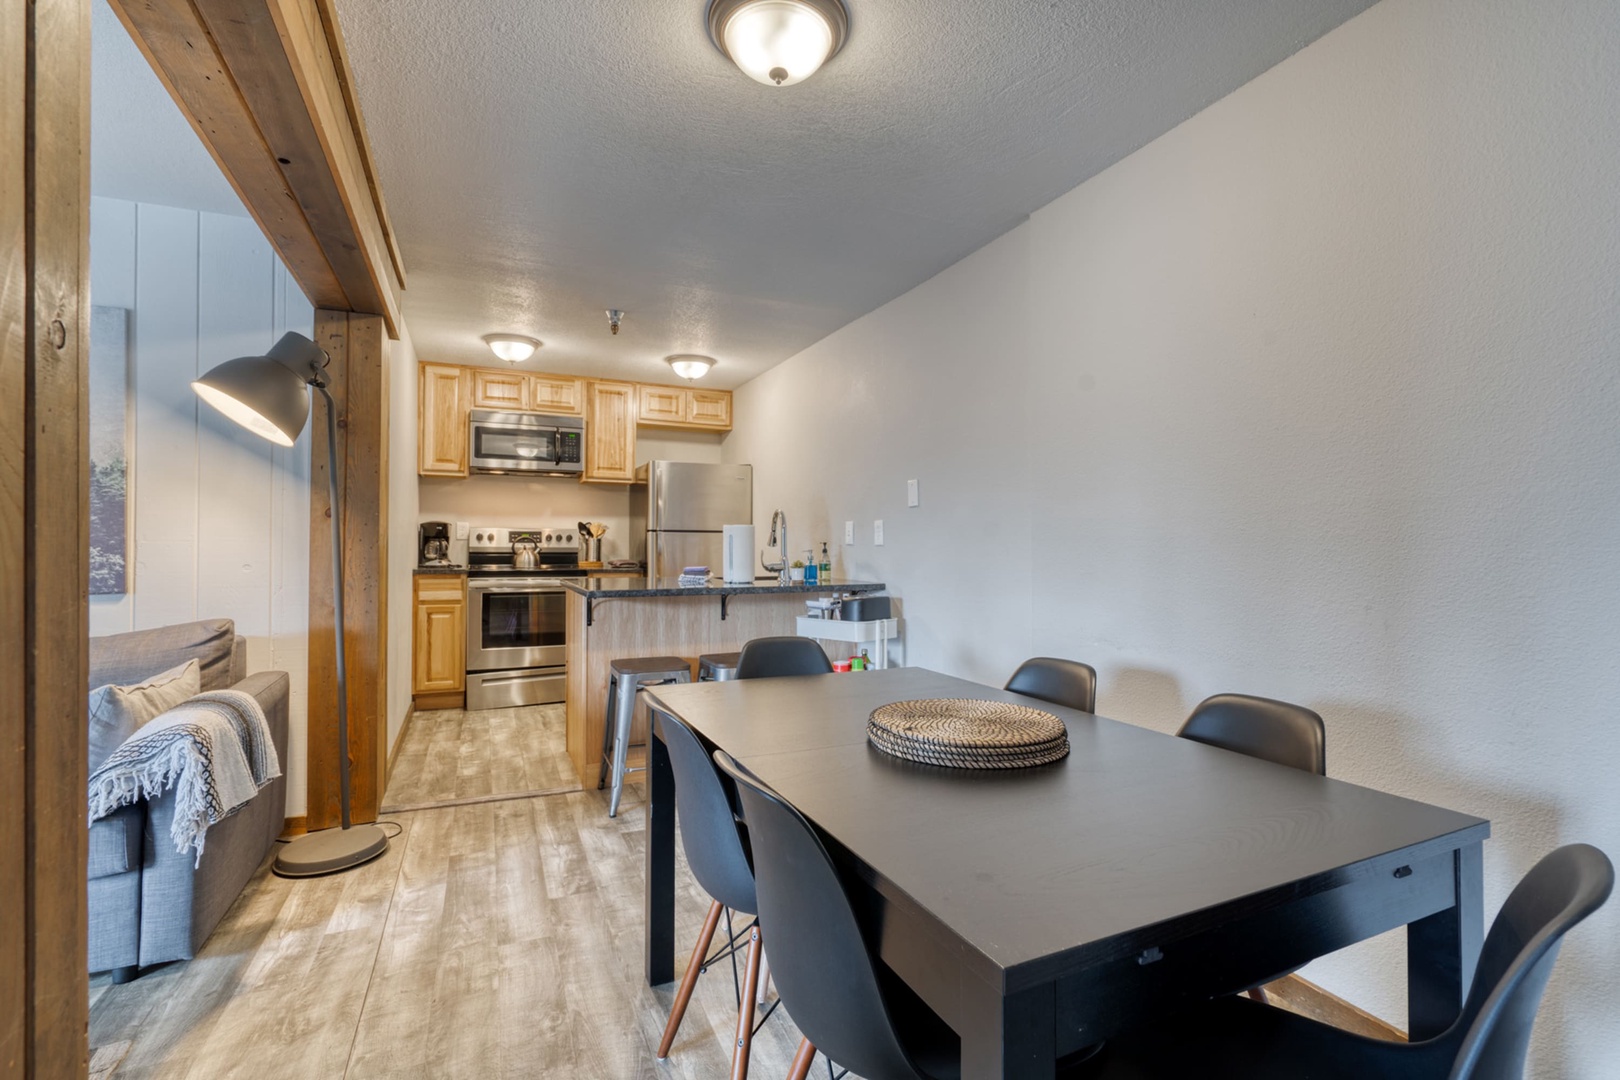 Government Camp Vacation Rentals, Mt Hood Views Condo #304 - Kitchen and dining area